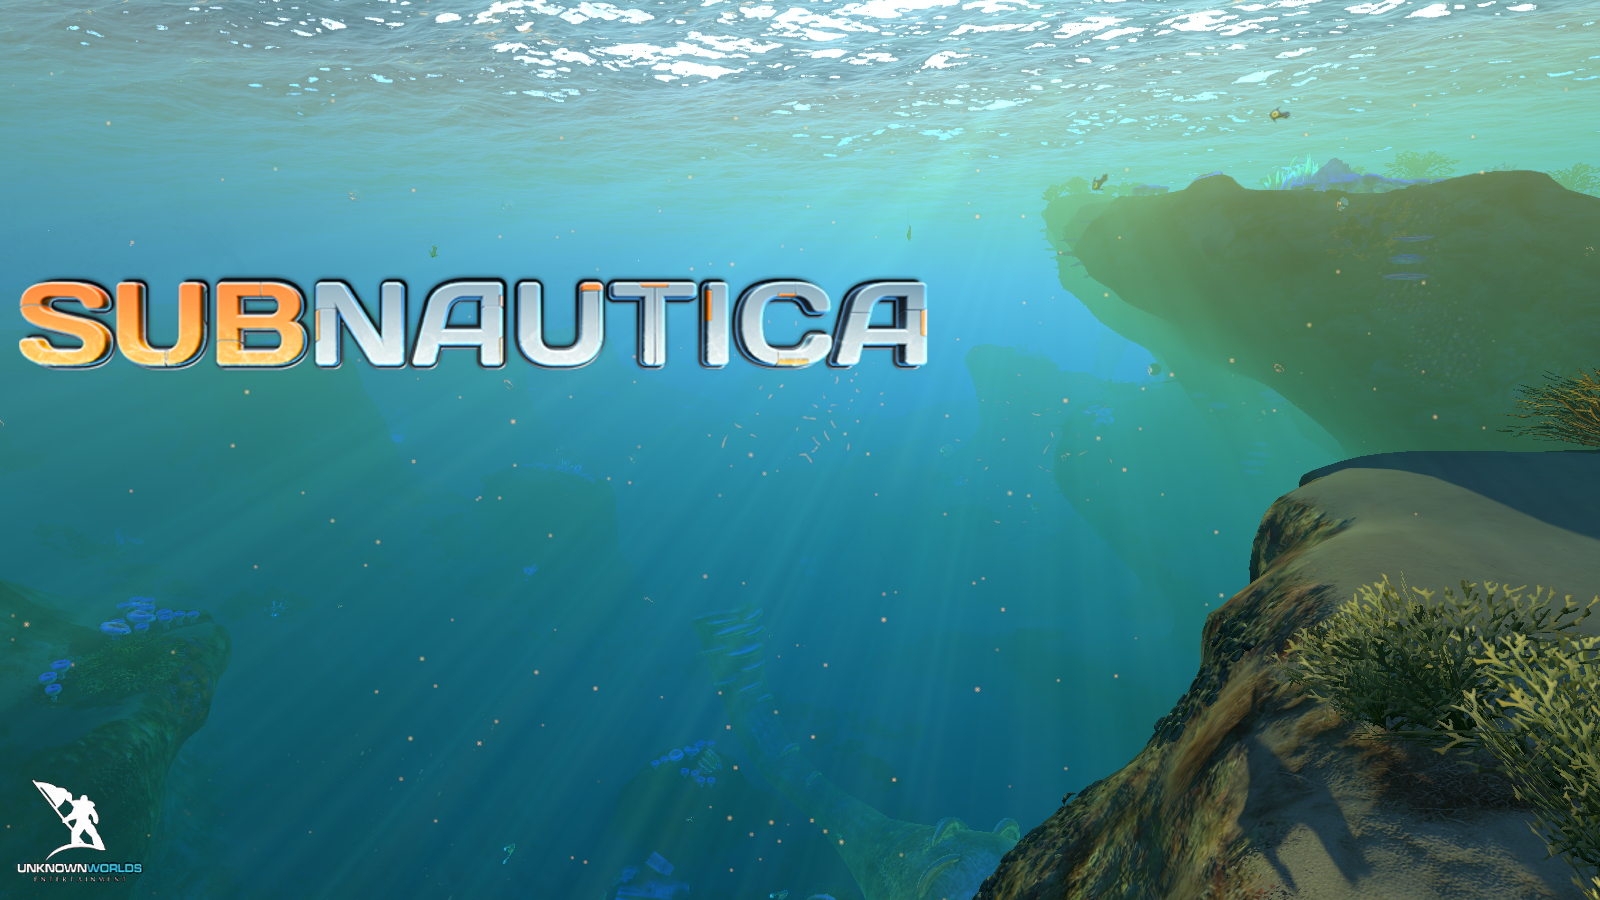 Subnautica Game Wallpapers